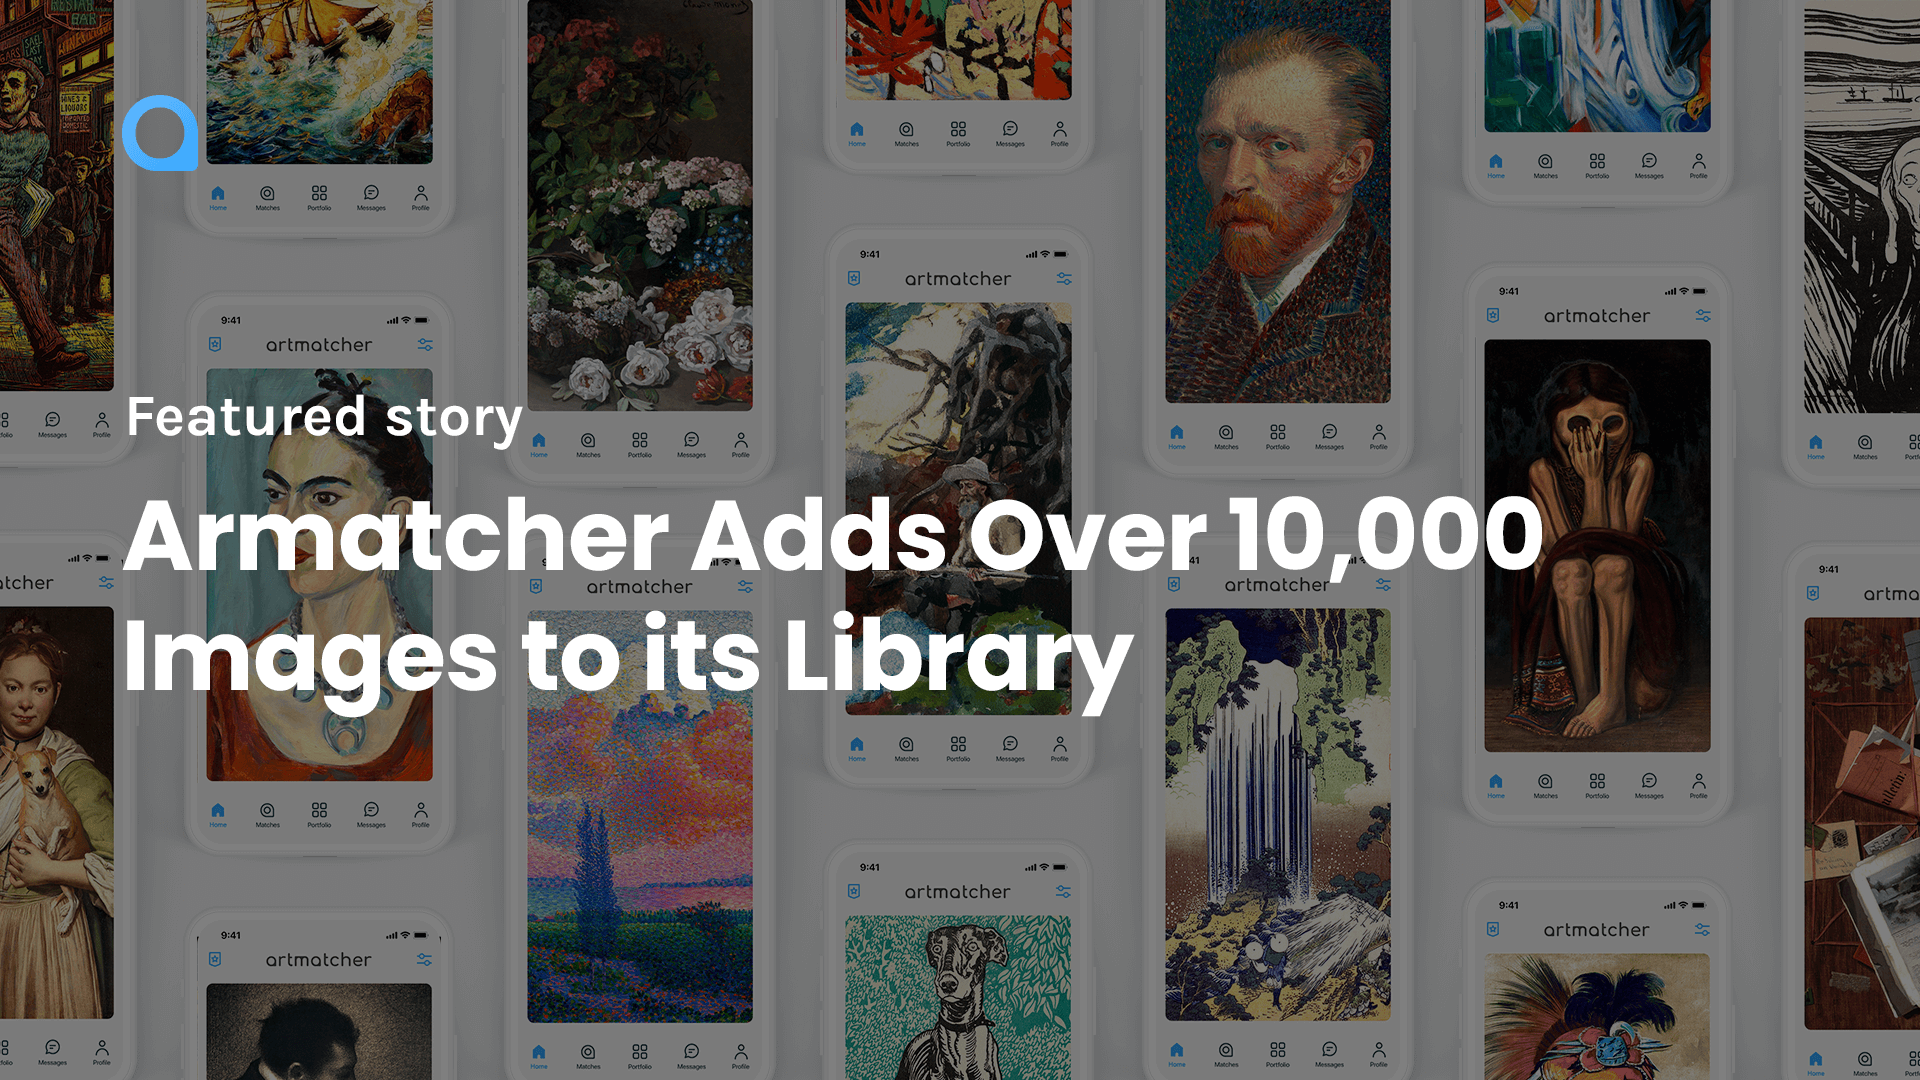 Armatcher Adds Over 10,000 Images to its Library